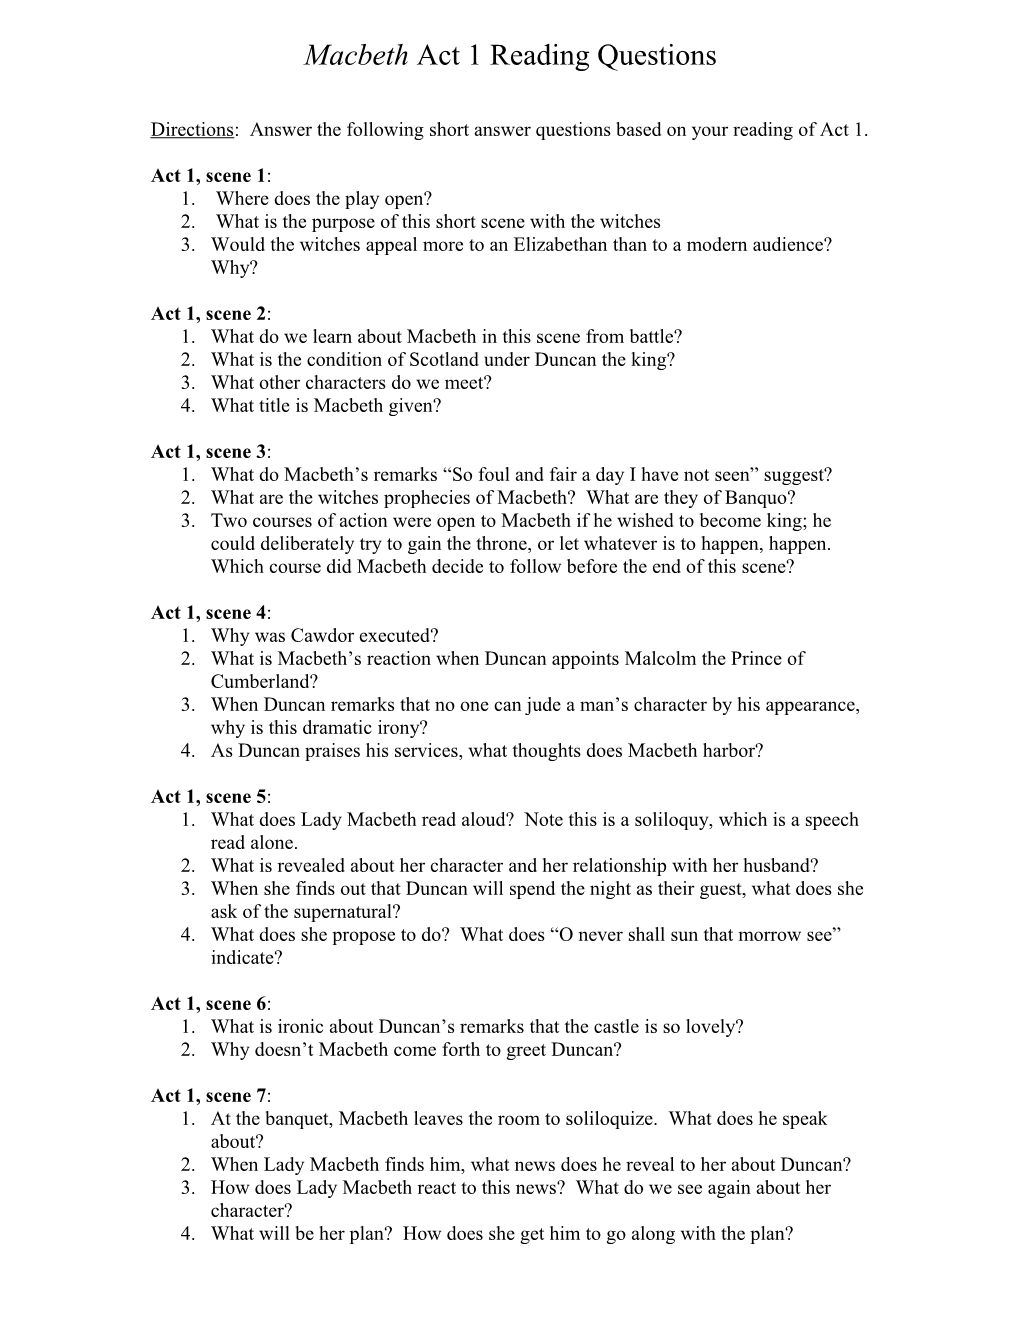 Macbeth Act 1 Reading Questions